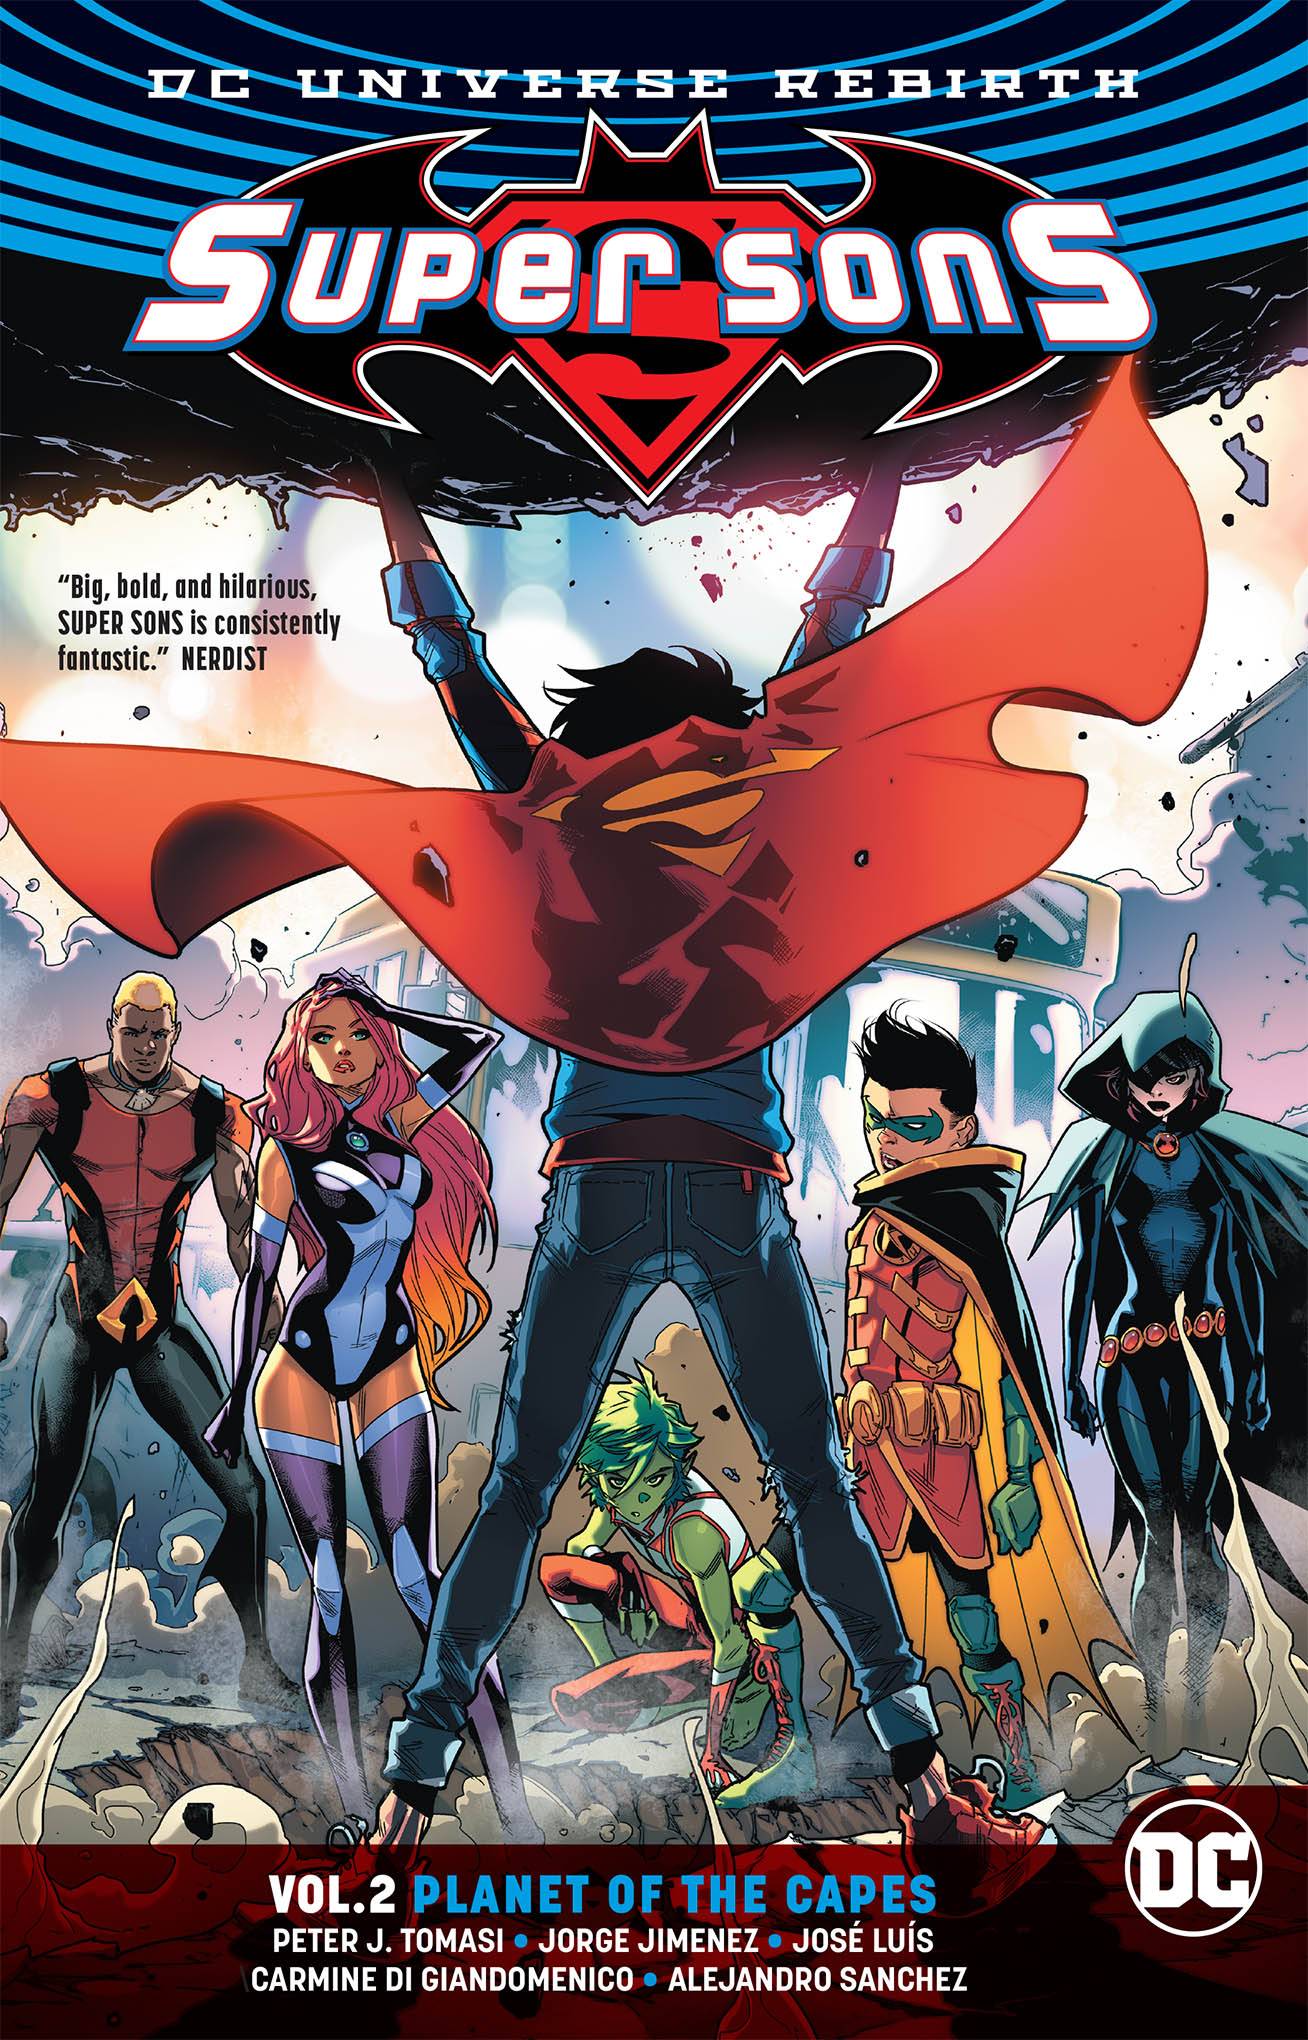 Super Sons Graphic Novel Volume 2 Planet of the Capes Rebirth